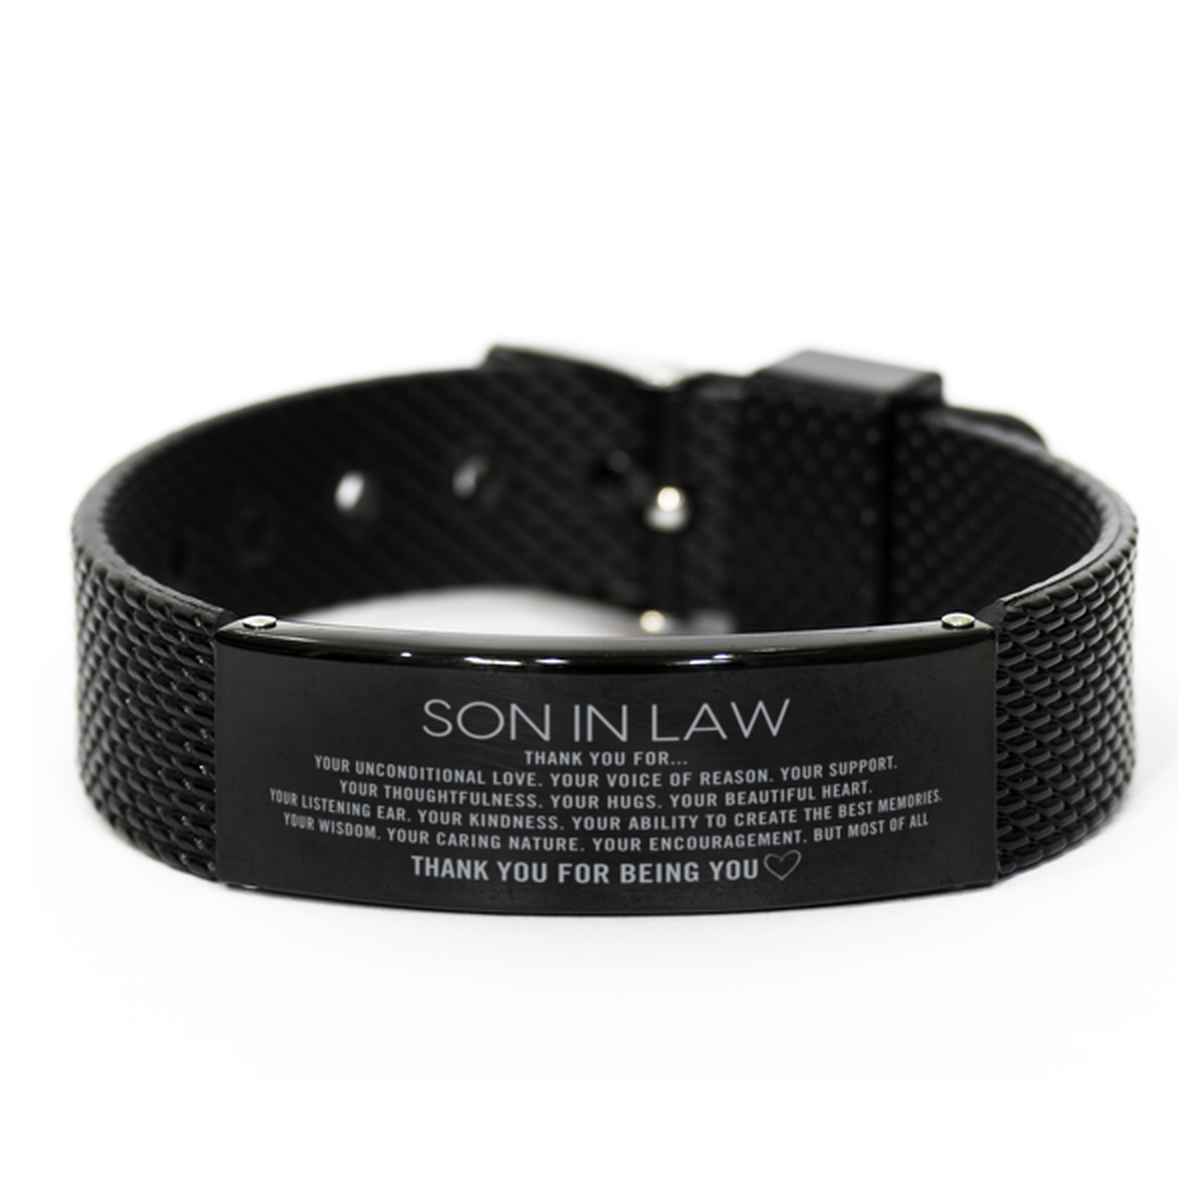 Son In Law Black Shark Mesh Bracelet Custom, Engraved Gifts For Son In Law Christmas Graduation Birthday Gifts for Men Women Son In Law Thank you for Your unconditional love